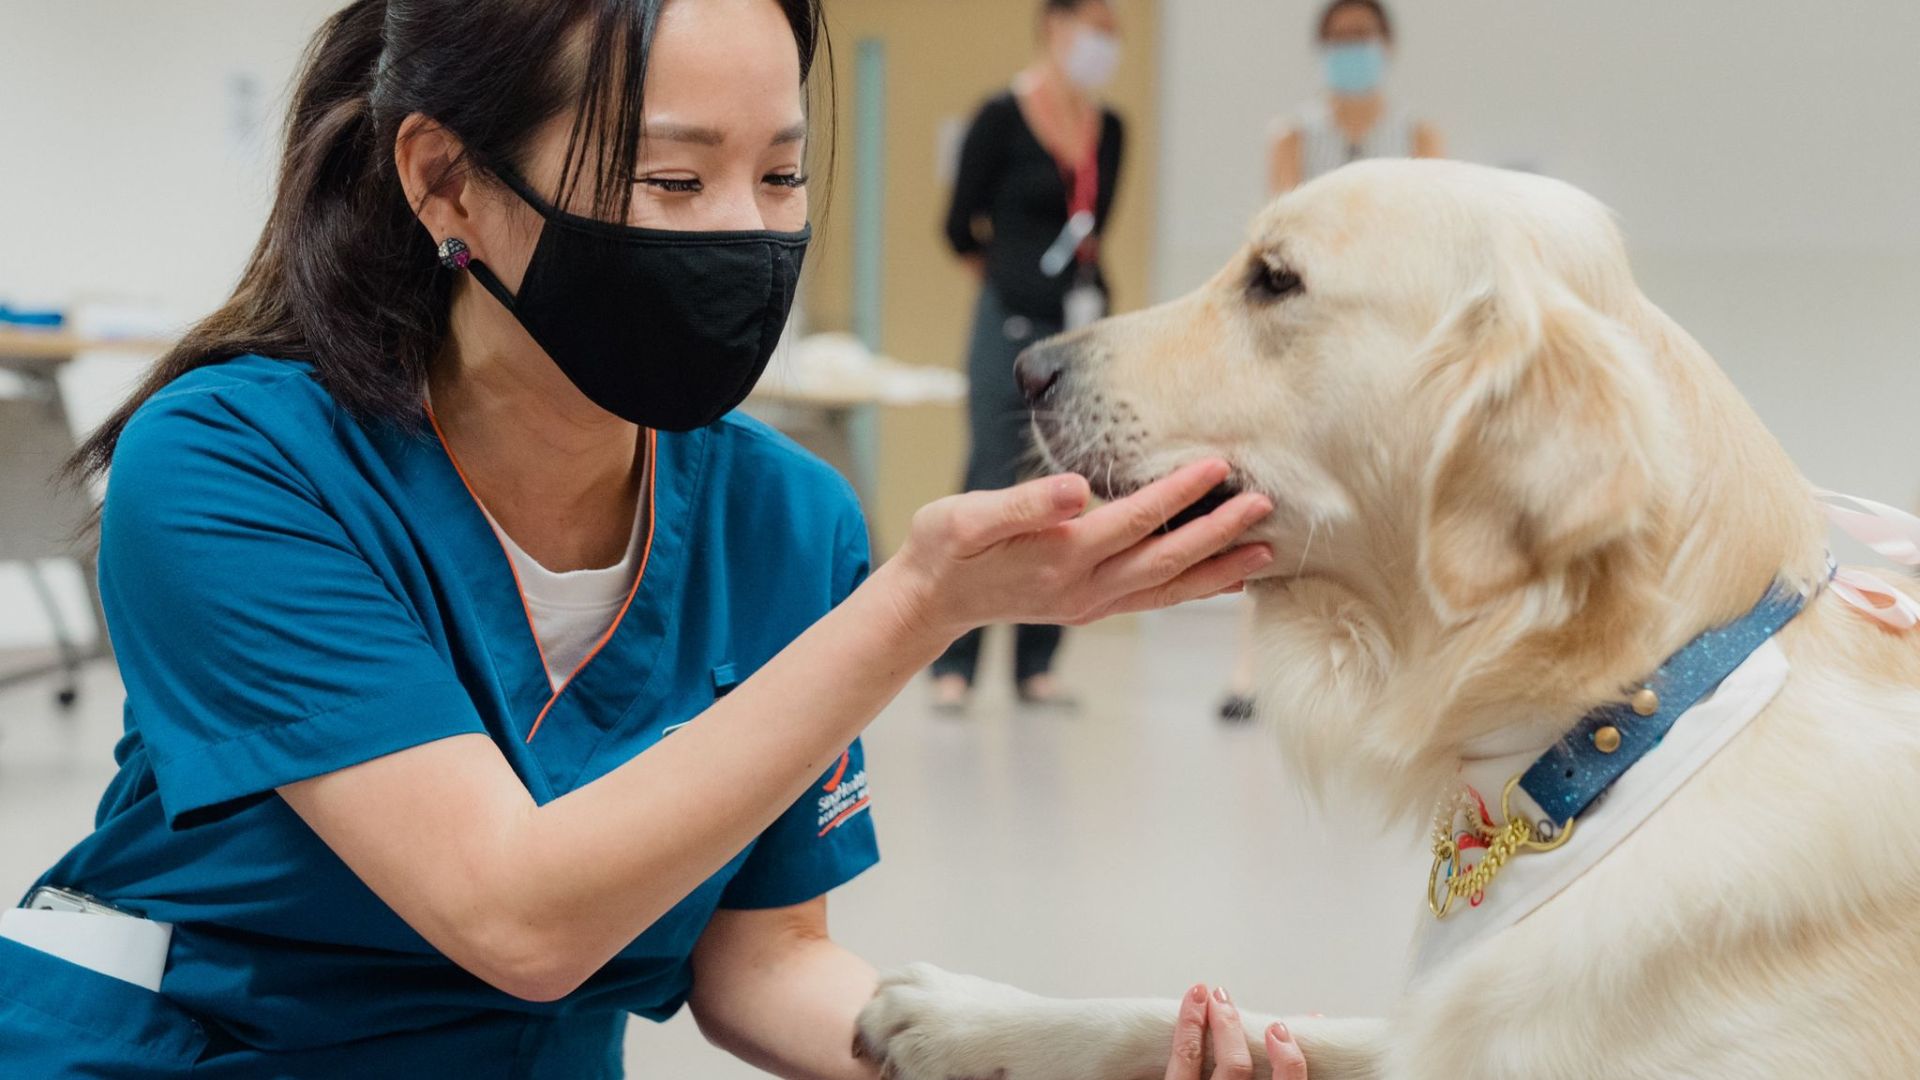 The healing power of animal-assisted therapy: When the dogtors make house calls